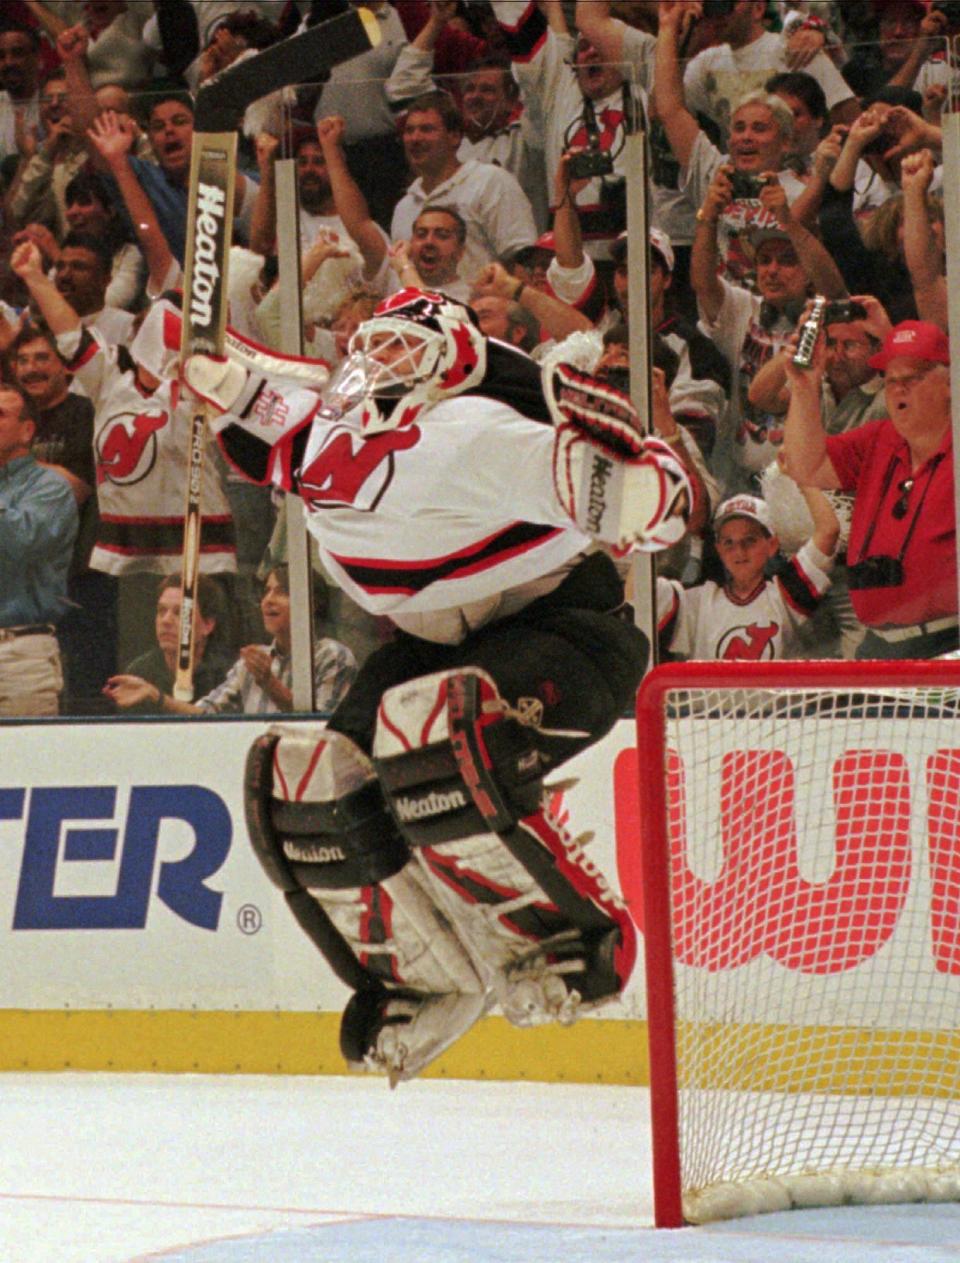 New Jersey Devils goalie Martin Brodeur reacts after his team defeated the Detroit Red Wings 5-2 and swept the series 4-0 to win the Stanley Cup, June 24, 1995 at the Meadowlands Arena in East Rutherford, N.J.  (AP Photo/Bill Kostroun)